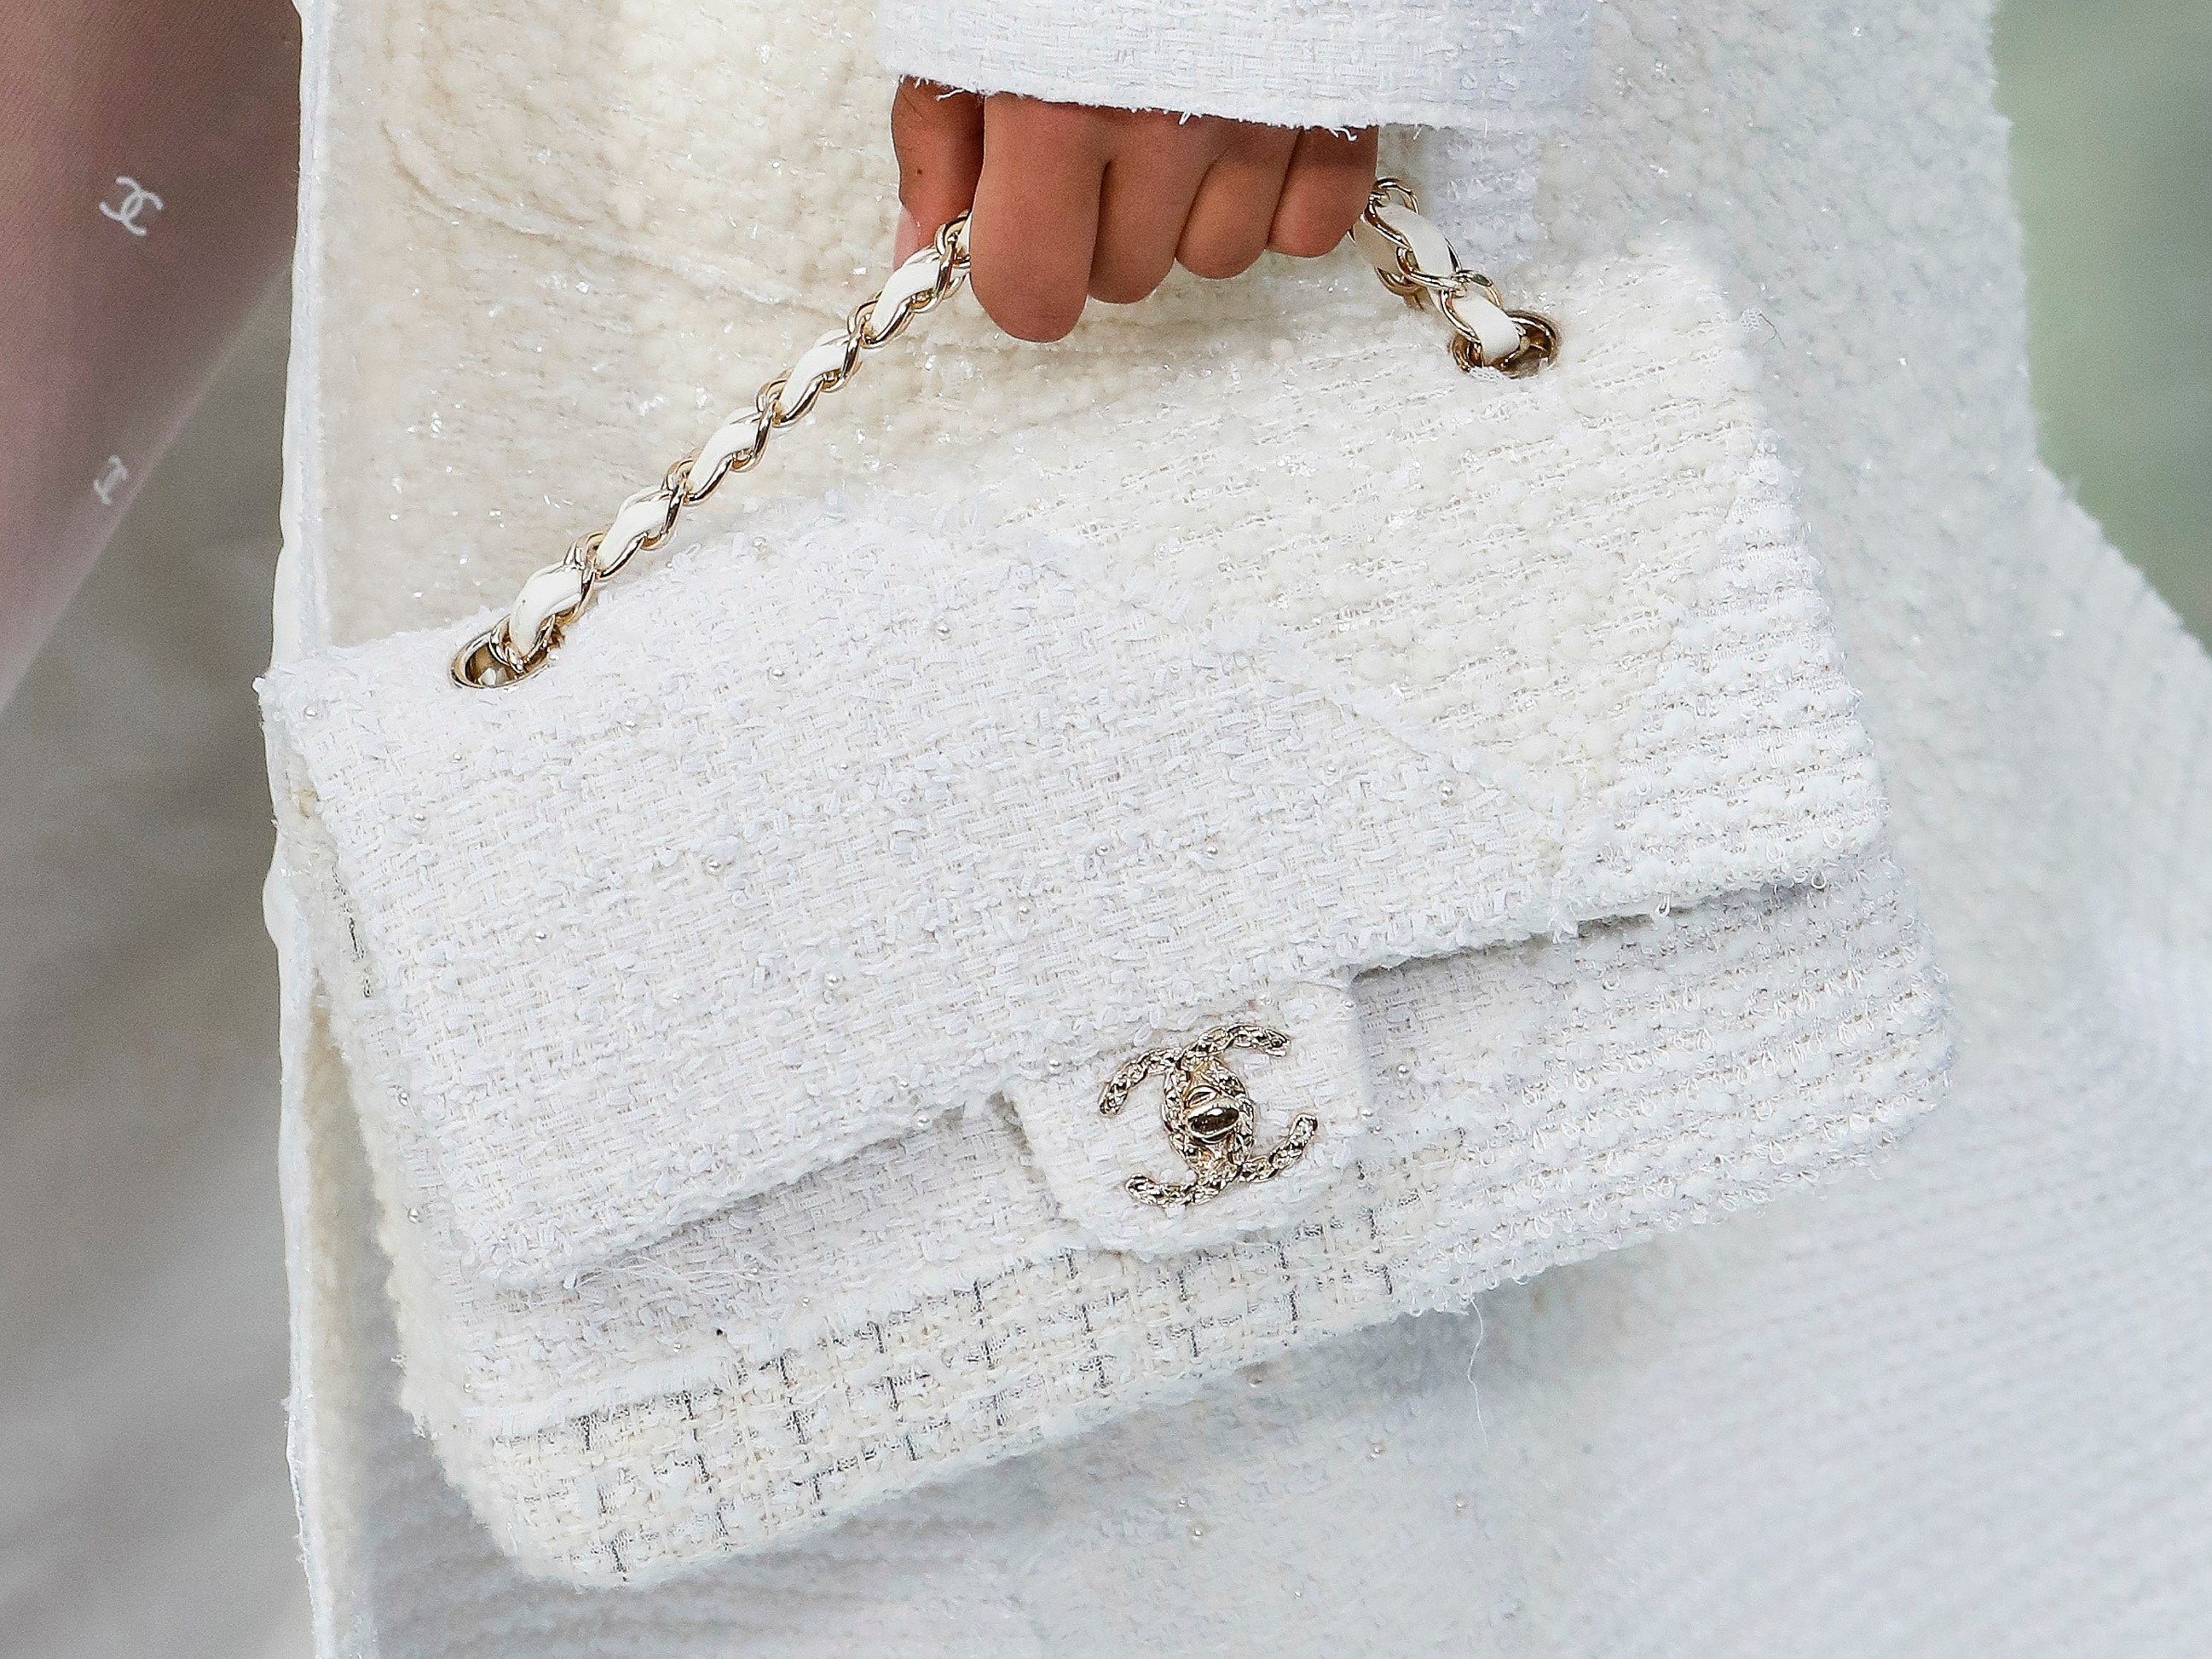 Let's Rebel Against Chanel. The price increases have me livid., by Bekah  Dang